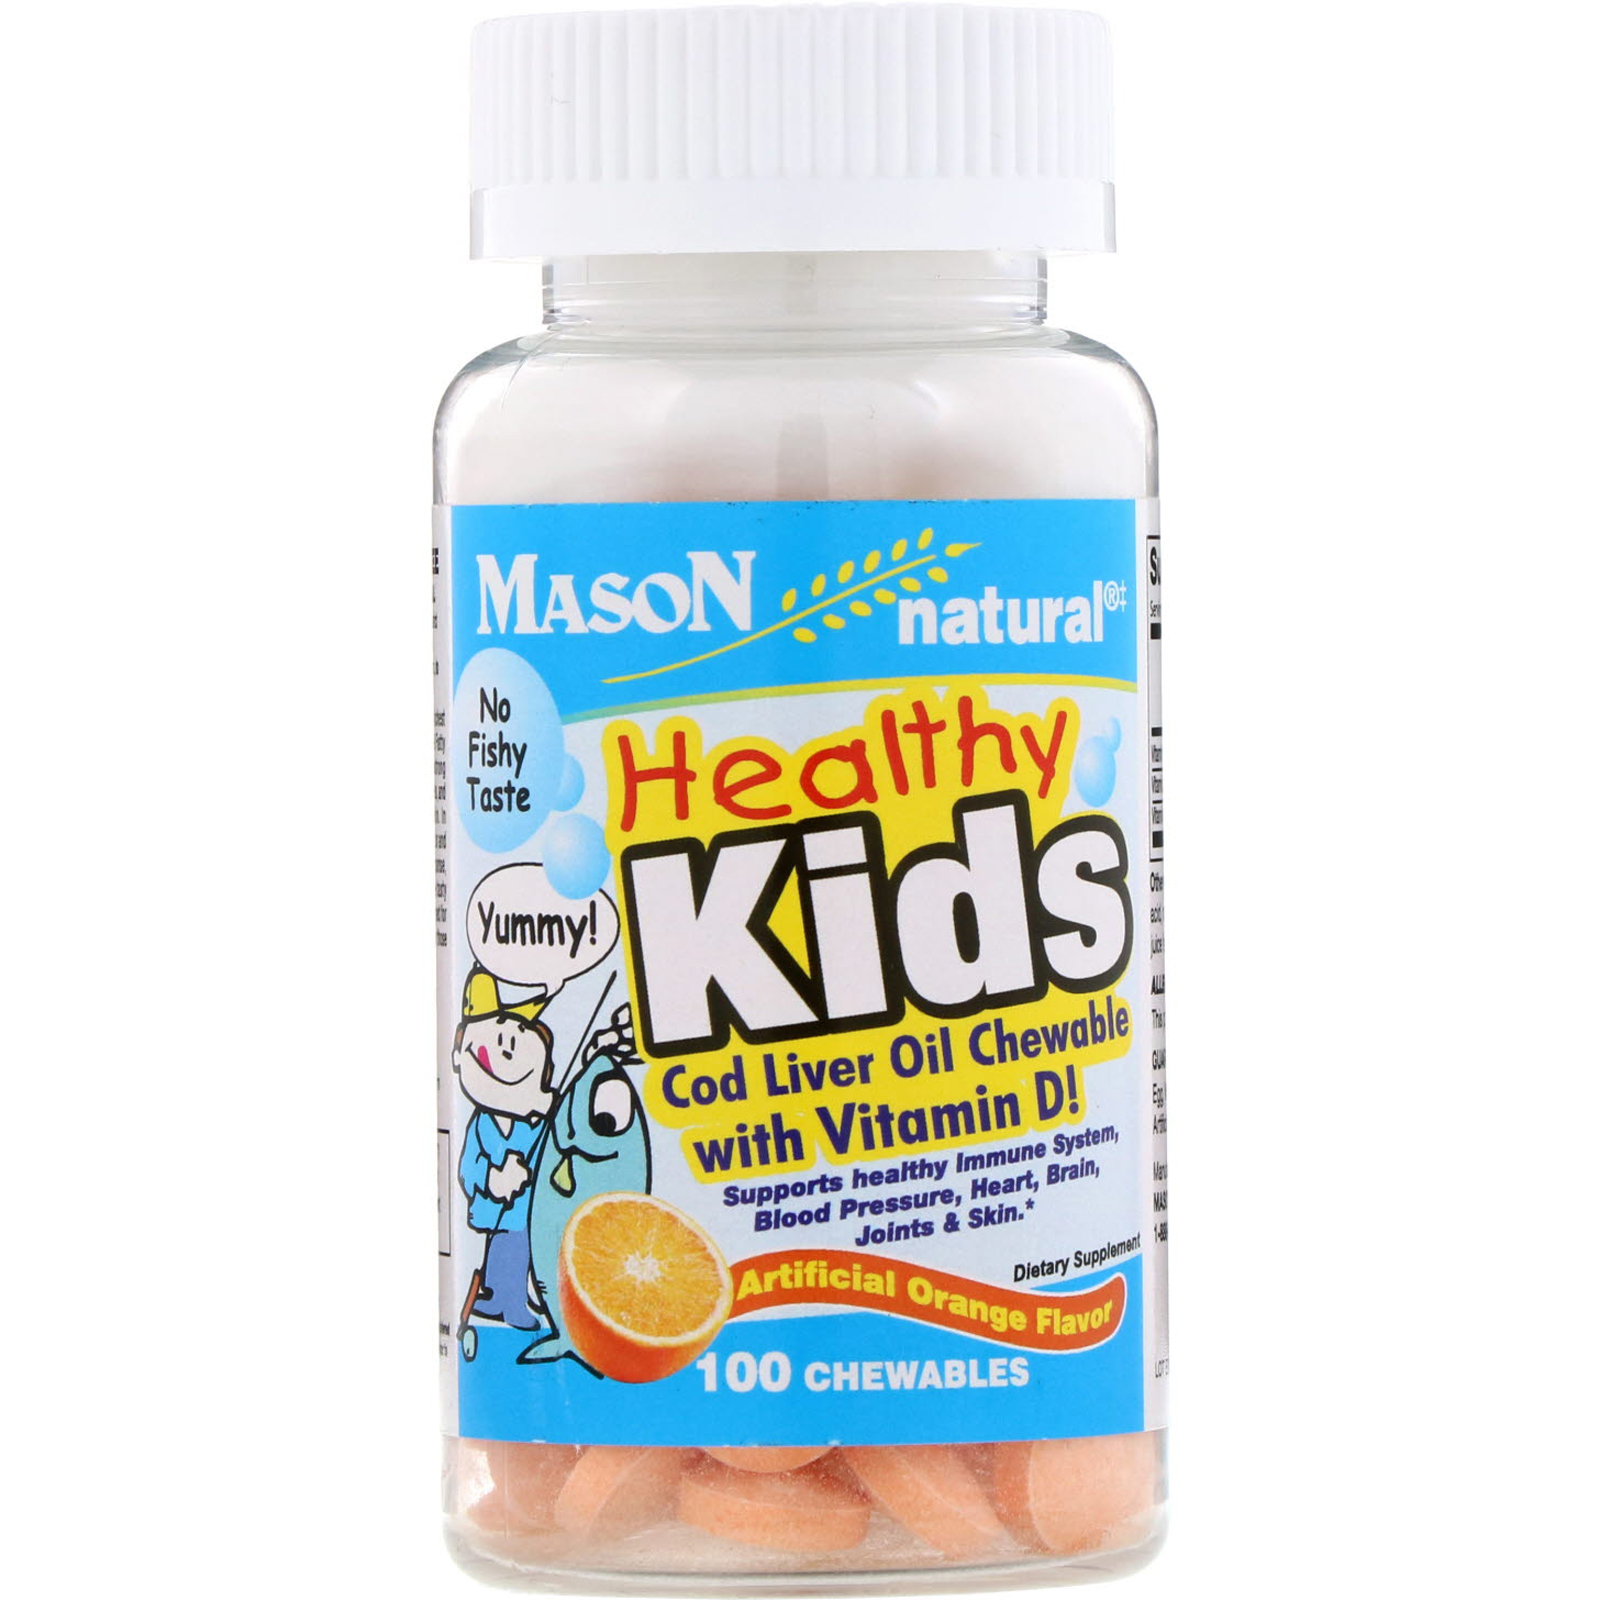 Mason Natural Healthy Kids Cod Liver Oil Chewable With